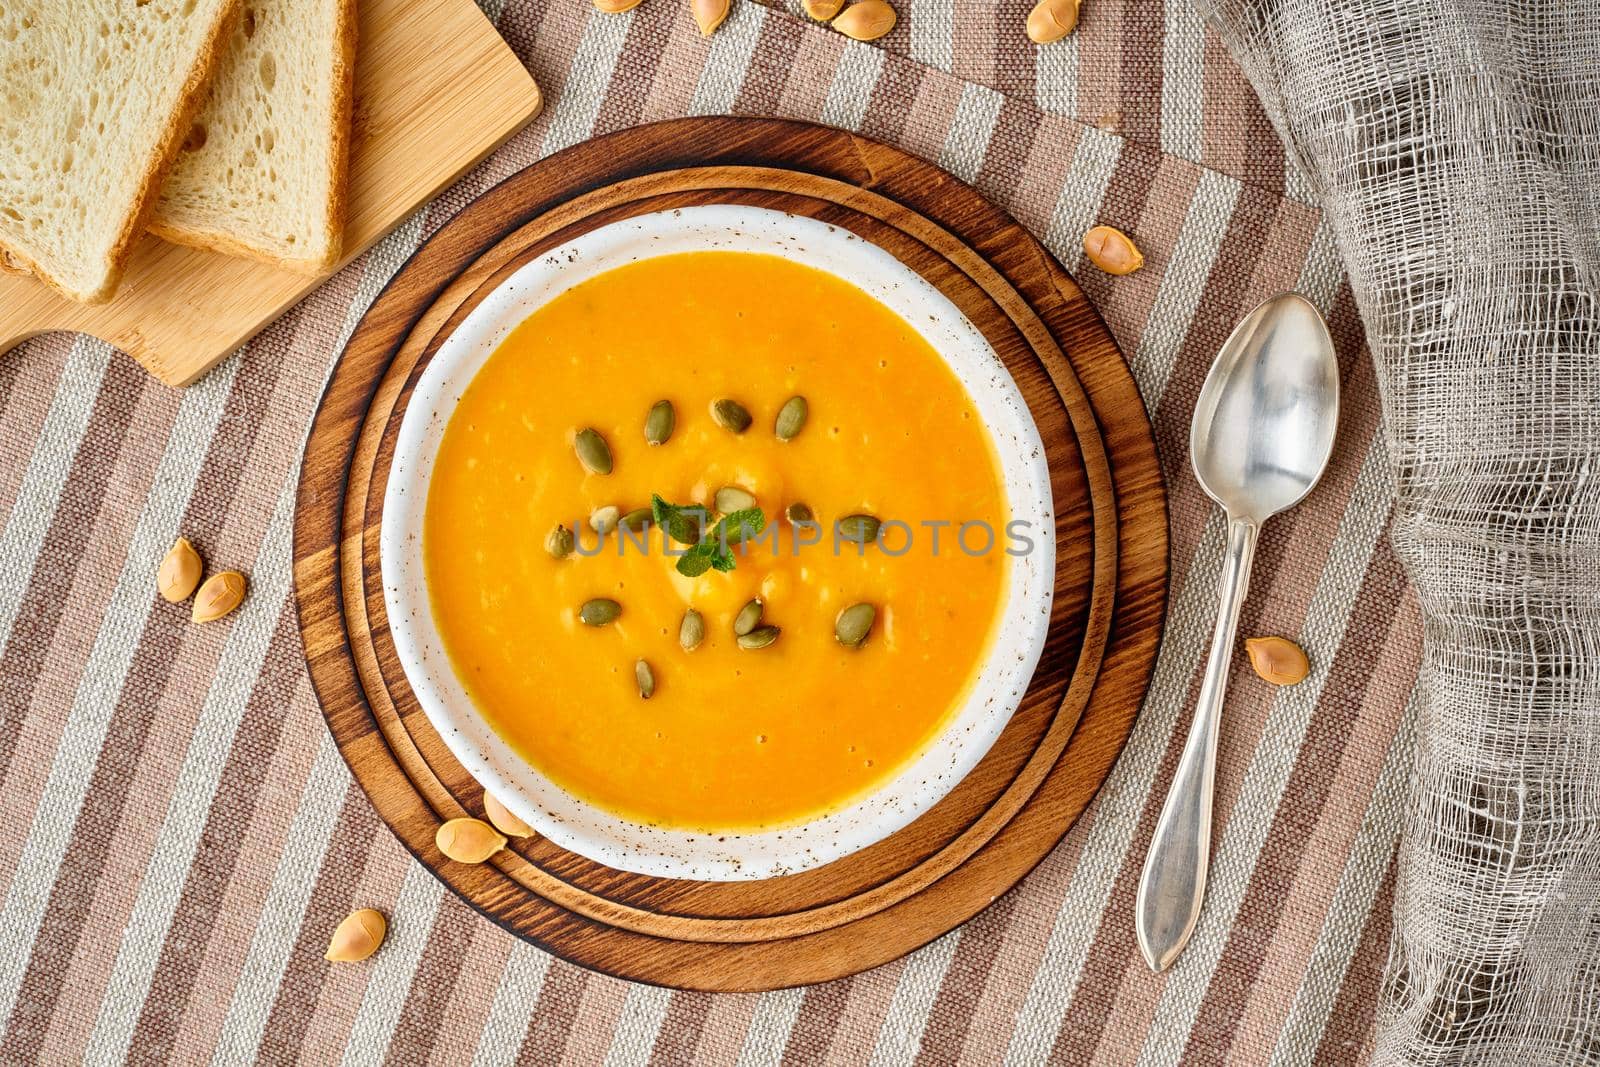 Pupmkin cream soup puree, Dietary vegetarian food on dark brown wooden table, top view, close up. by NataBene